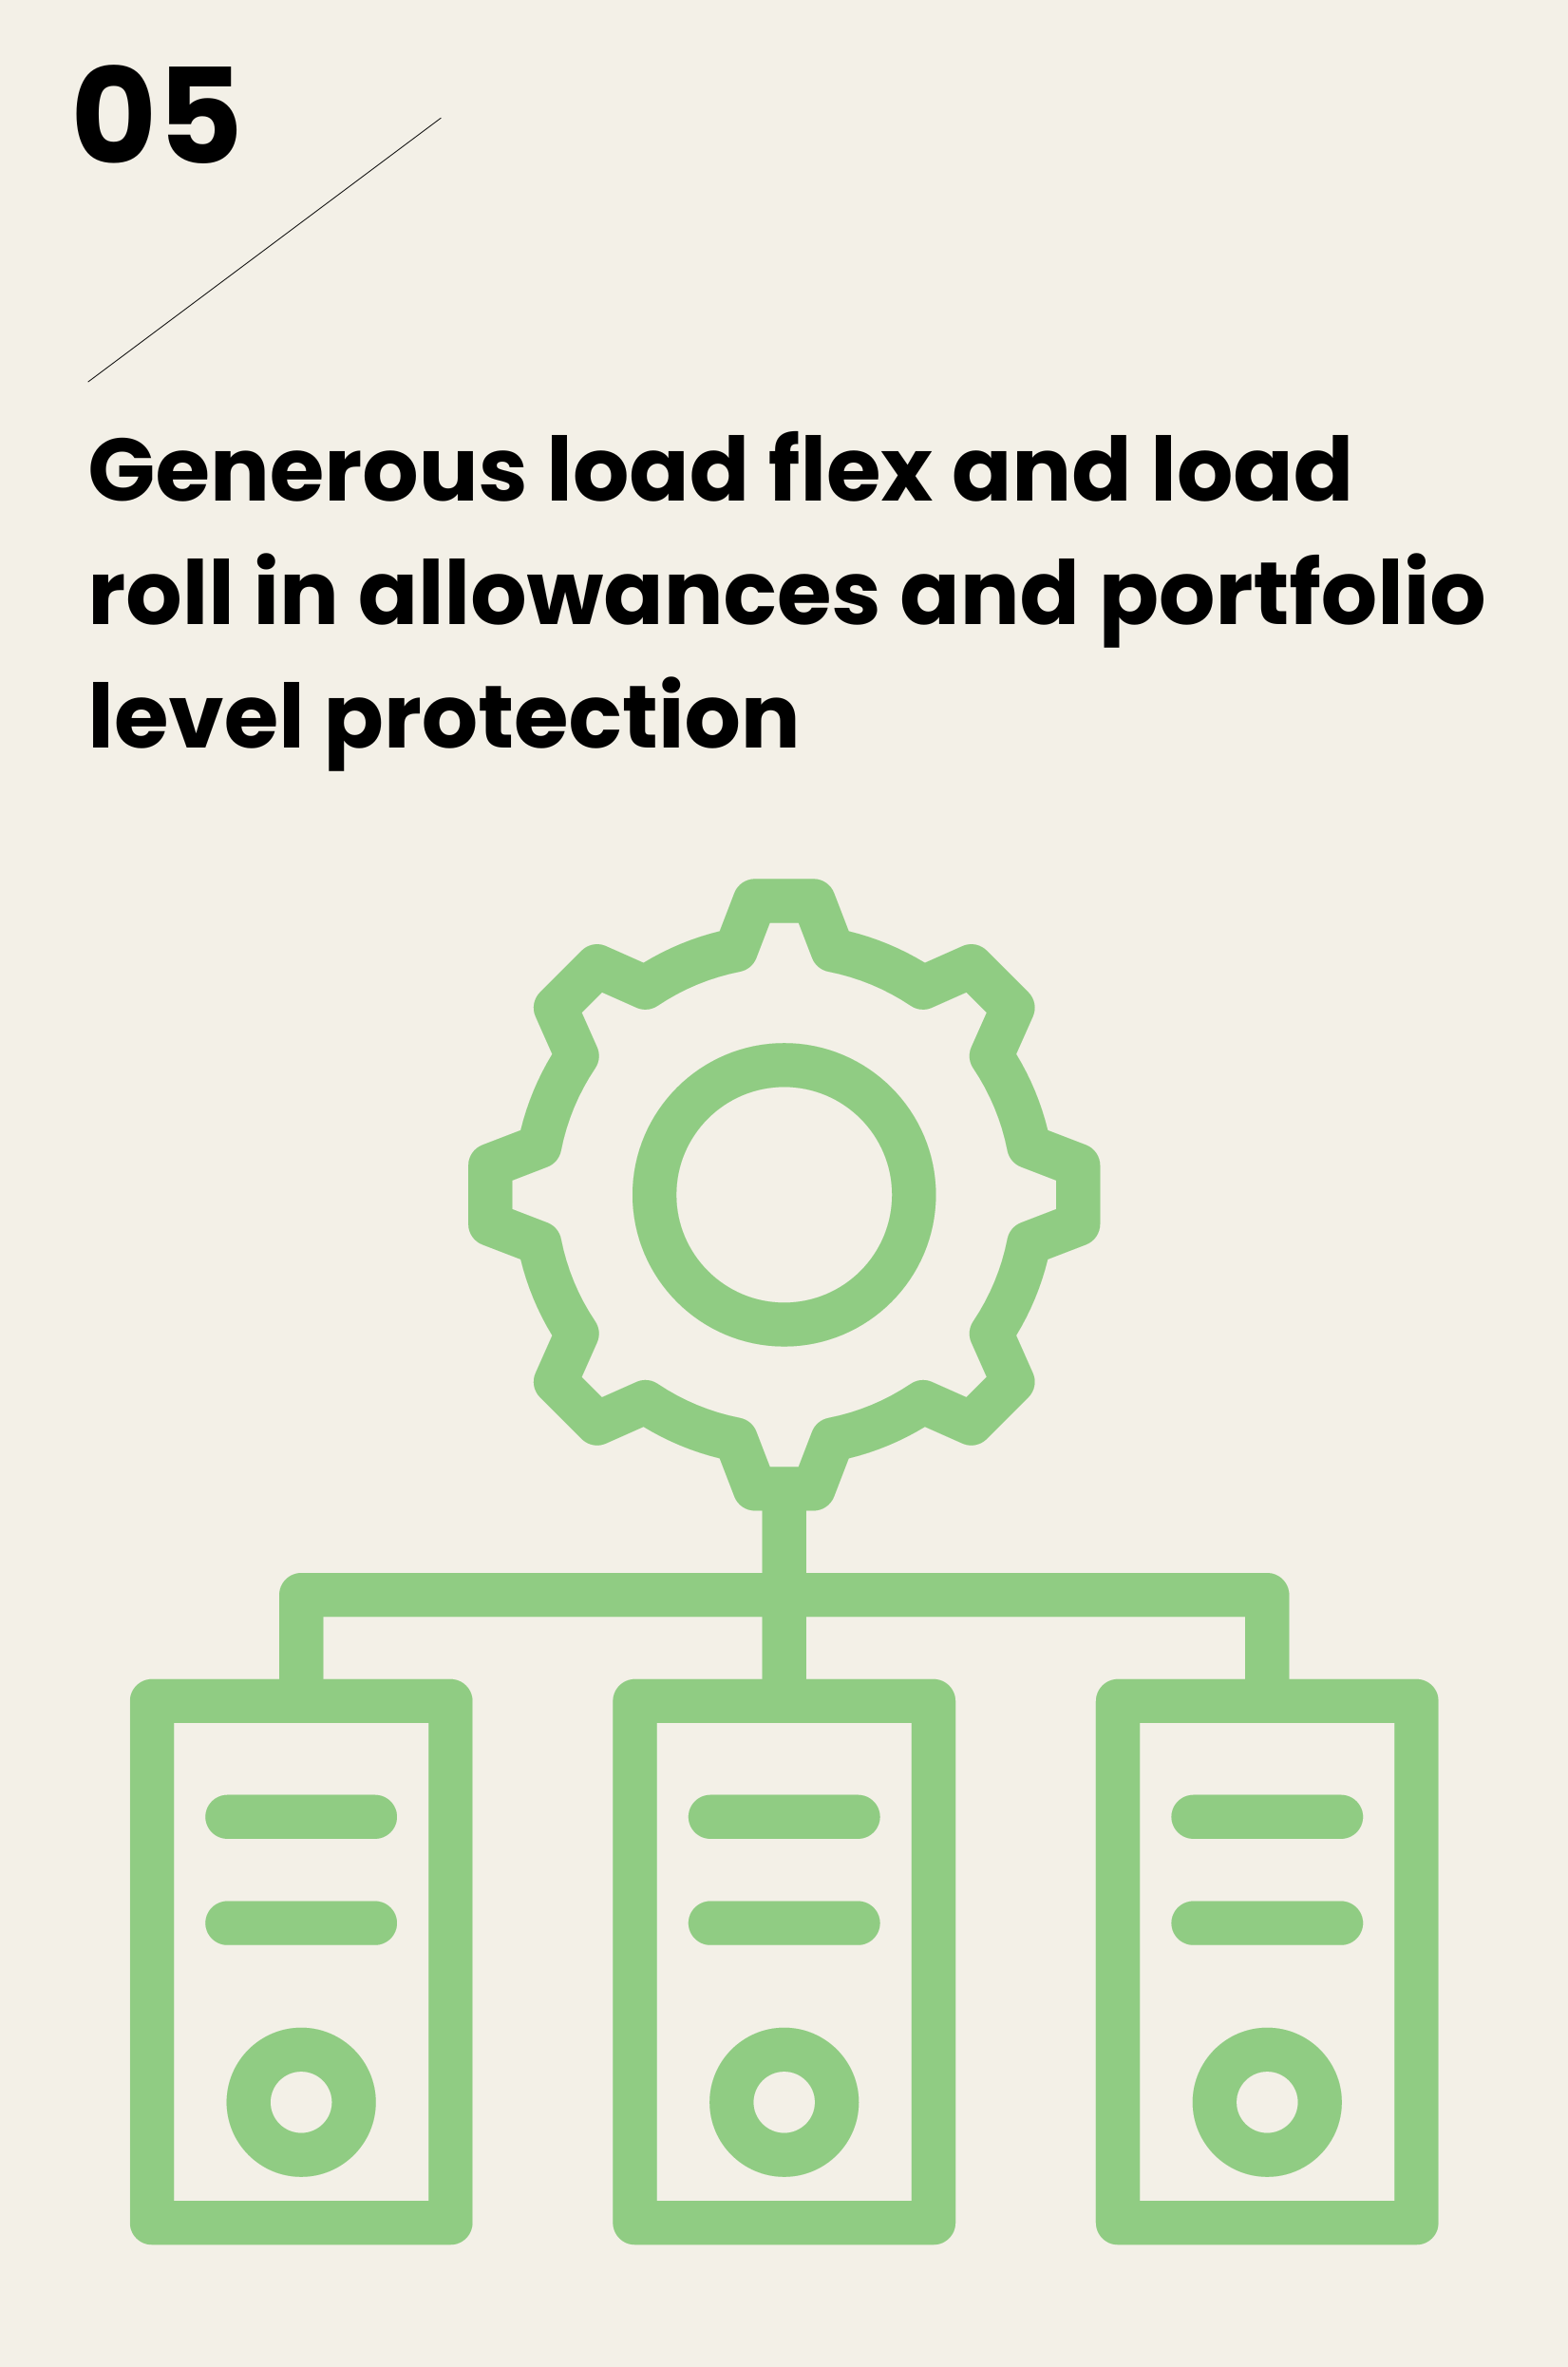 Generous load flex and load roll in allowances and portfolio level protection